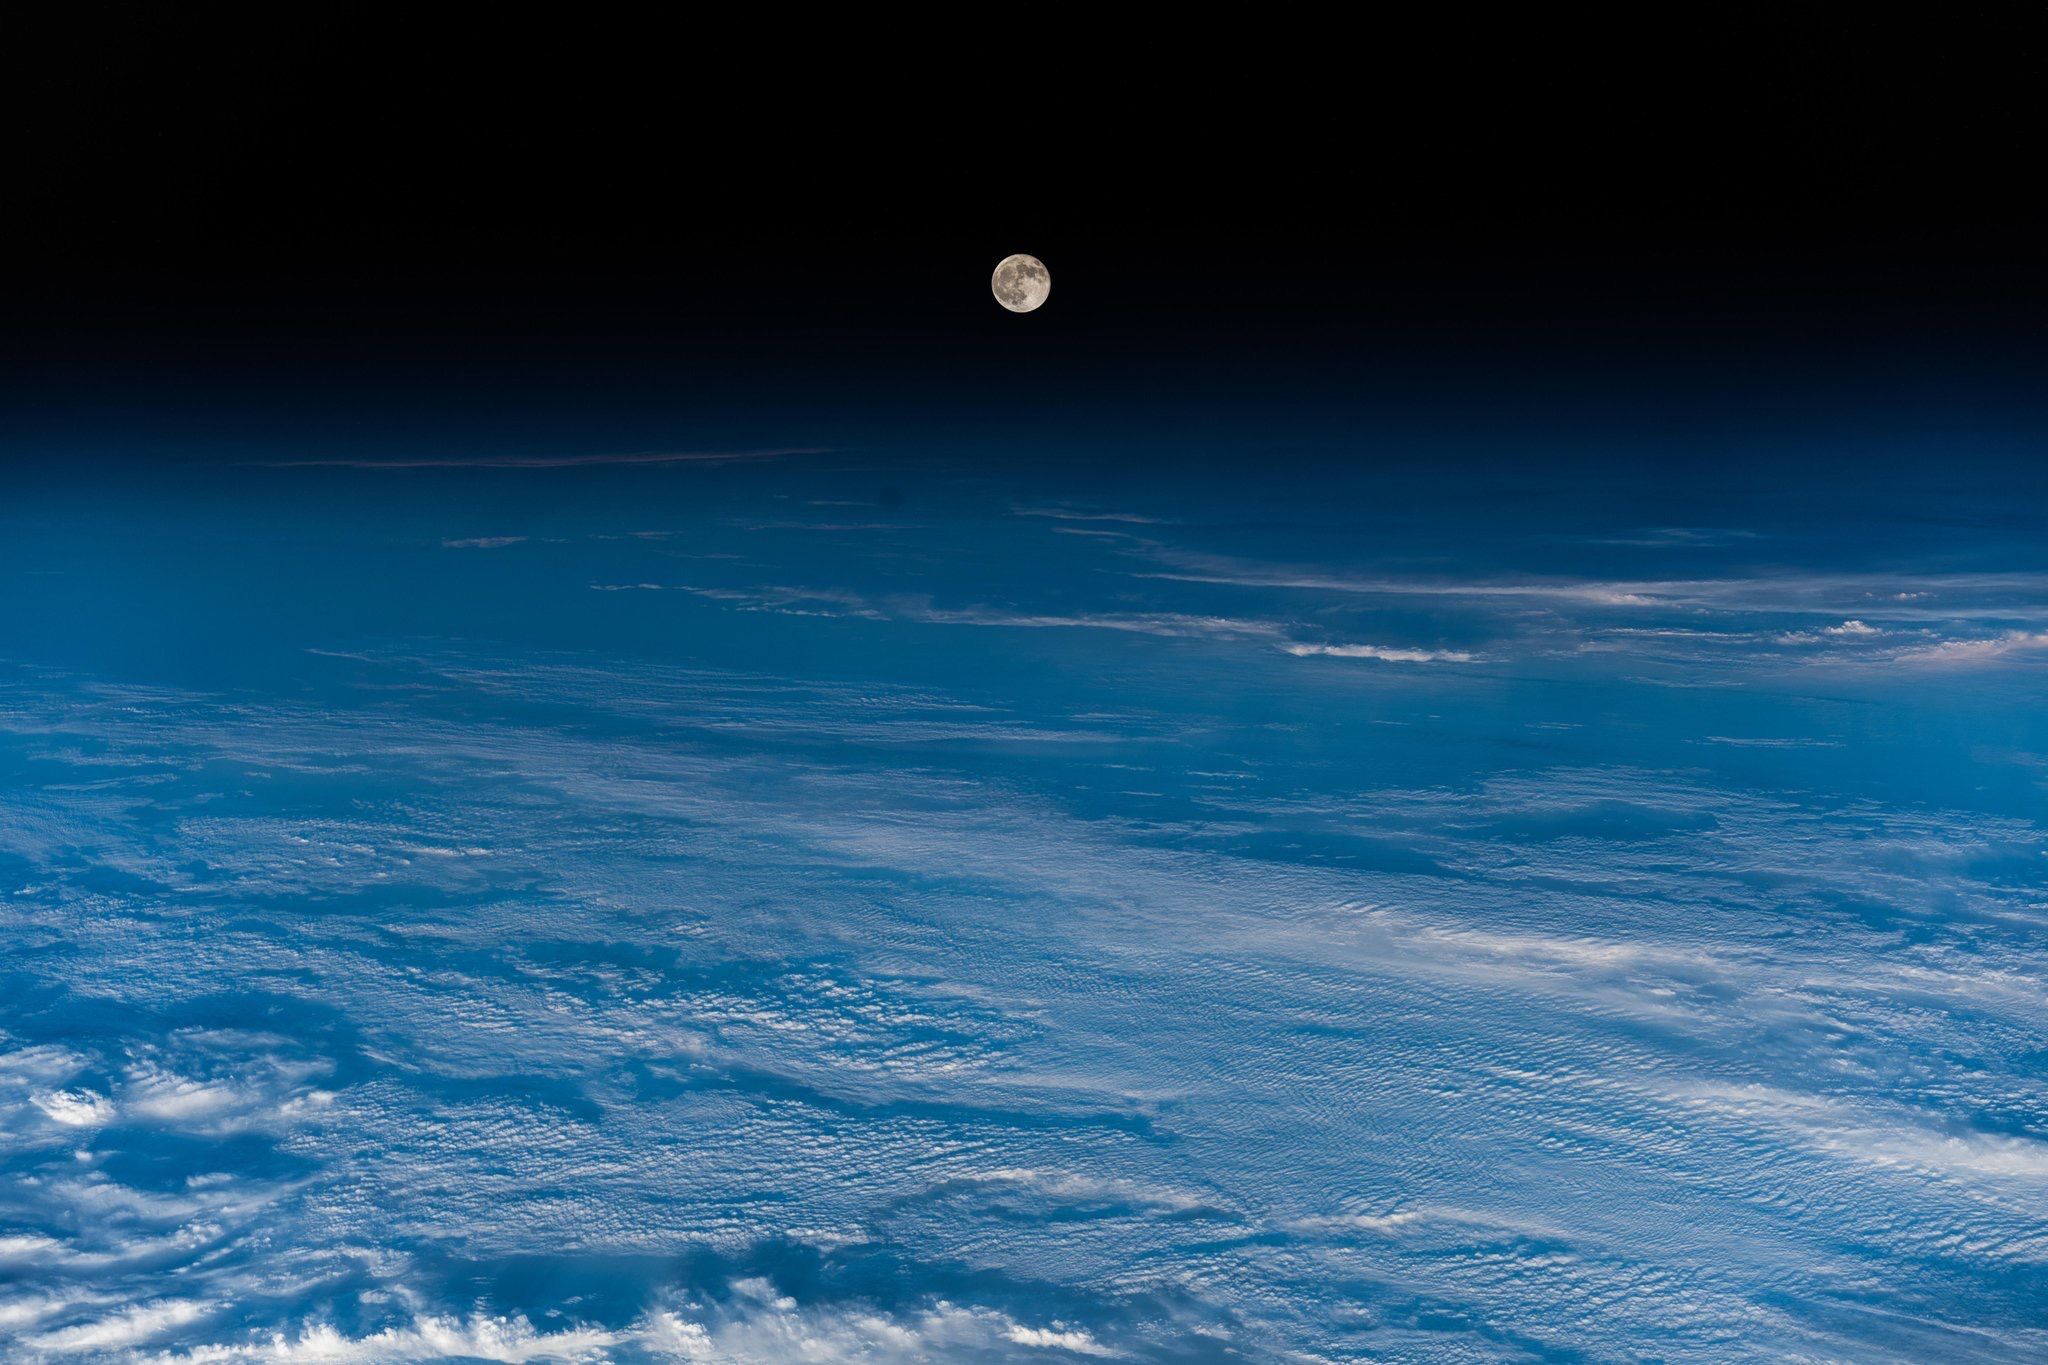 Full moon from the Space Station. Taken by the astronaut Alexander Gerst. August 2018.